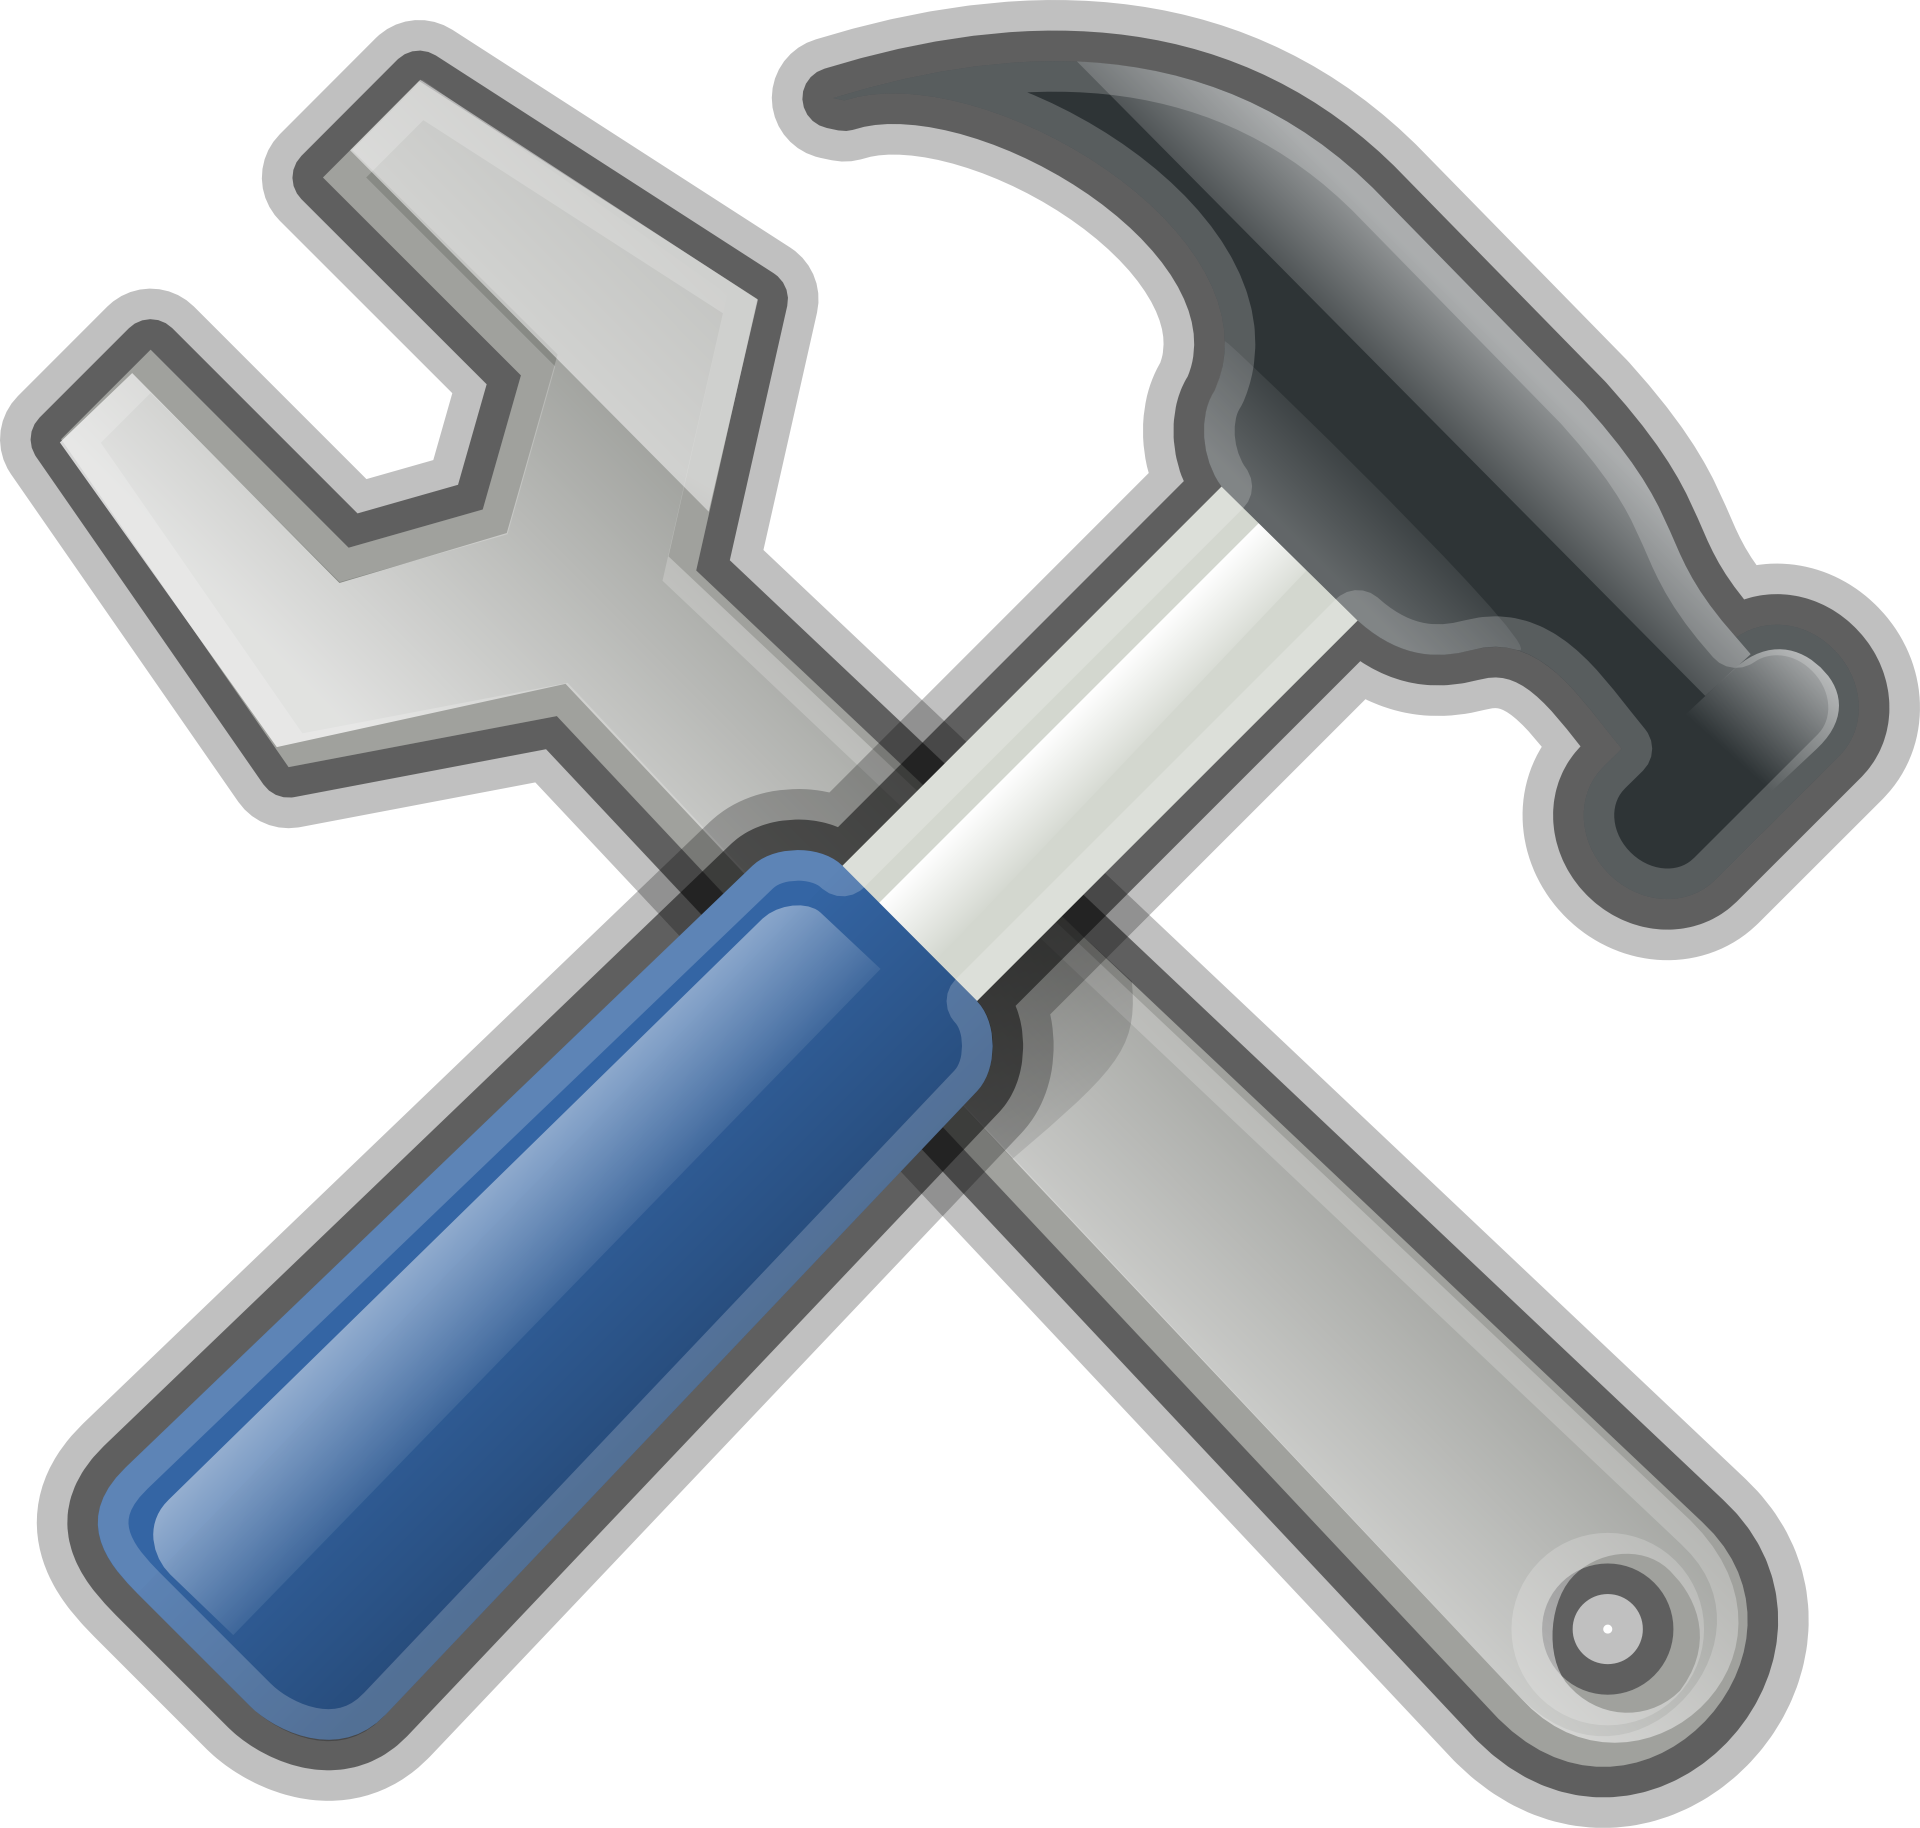 Am image of hammer and wrench